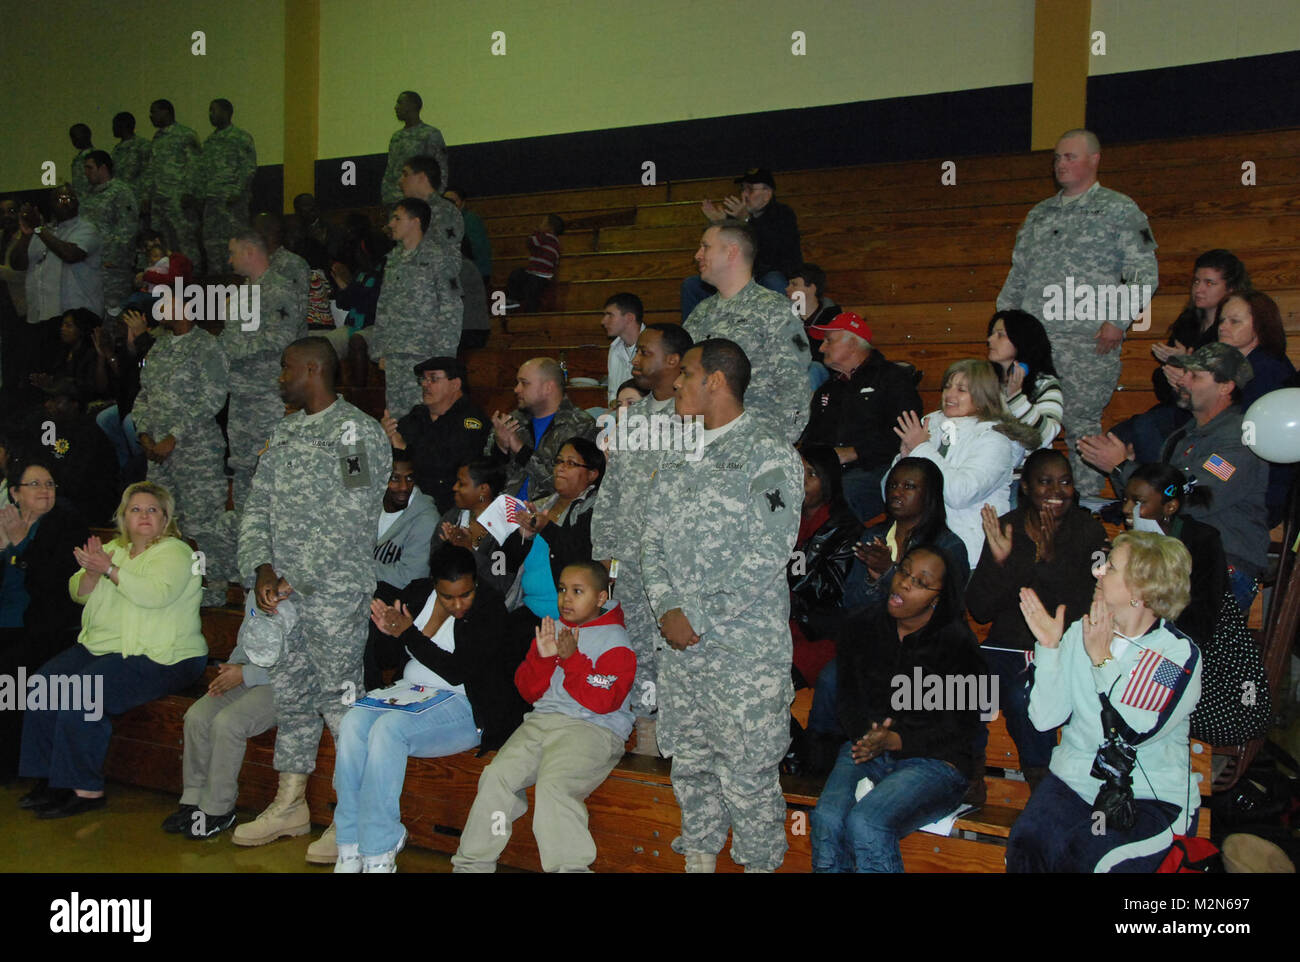 JEANERETTE, La. - Soldiers of the Louisiana Army National Guard's E Company, 199th Brigade Support Battalion, of the 256th Infantry Brigade Combat Team, bid farewell to family and friends at a deployment ceremony at Jeanerette High School in Jeanerette, La., Jan. 7.  (U.S. Army Photo by Sgt. Michael L. Owens, Louisiana National Guard State Unit Public Affairs Representative) 100107-A-0635O-046 by Louisiana National Guard Stock Photo